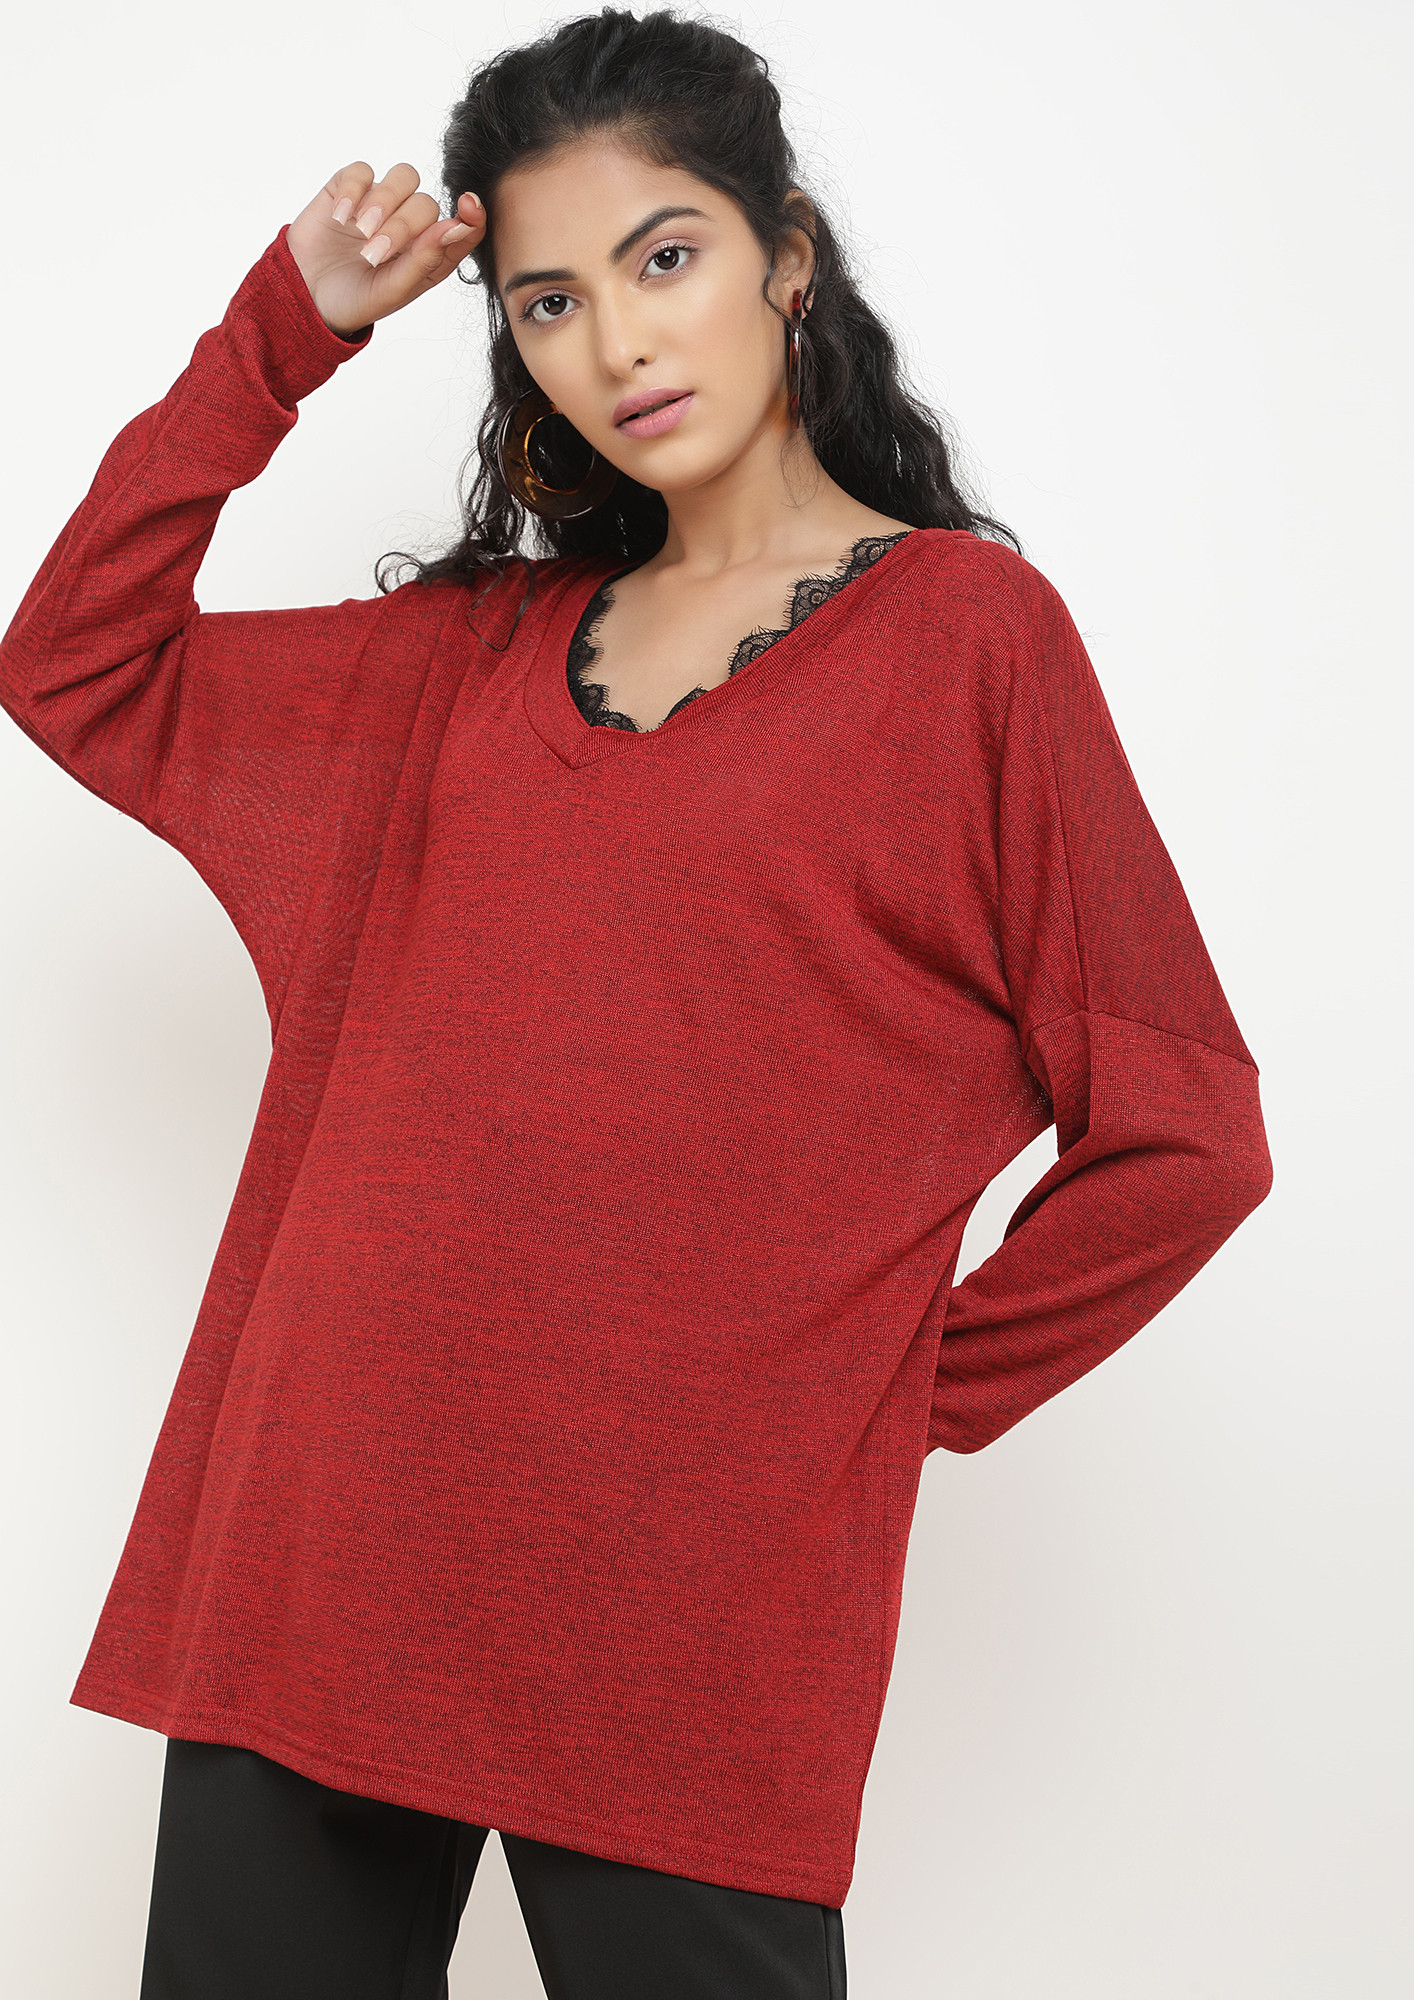 CALL FOR A KNIT RED TUNIC TOP